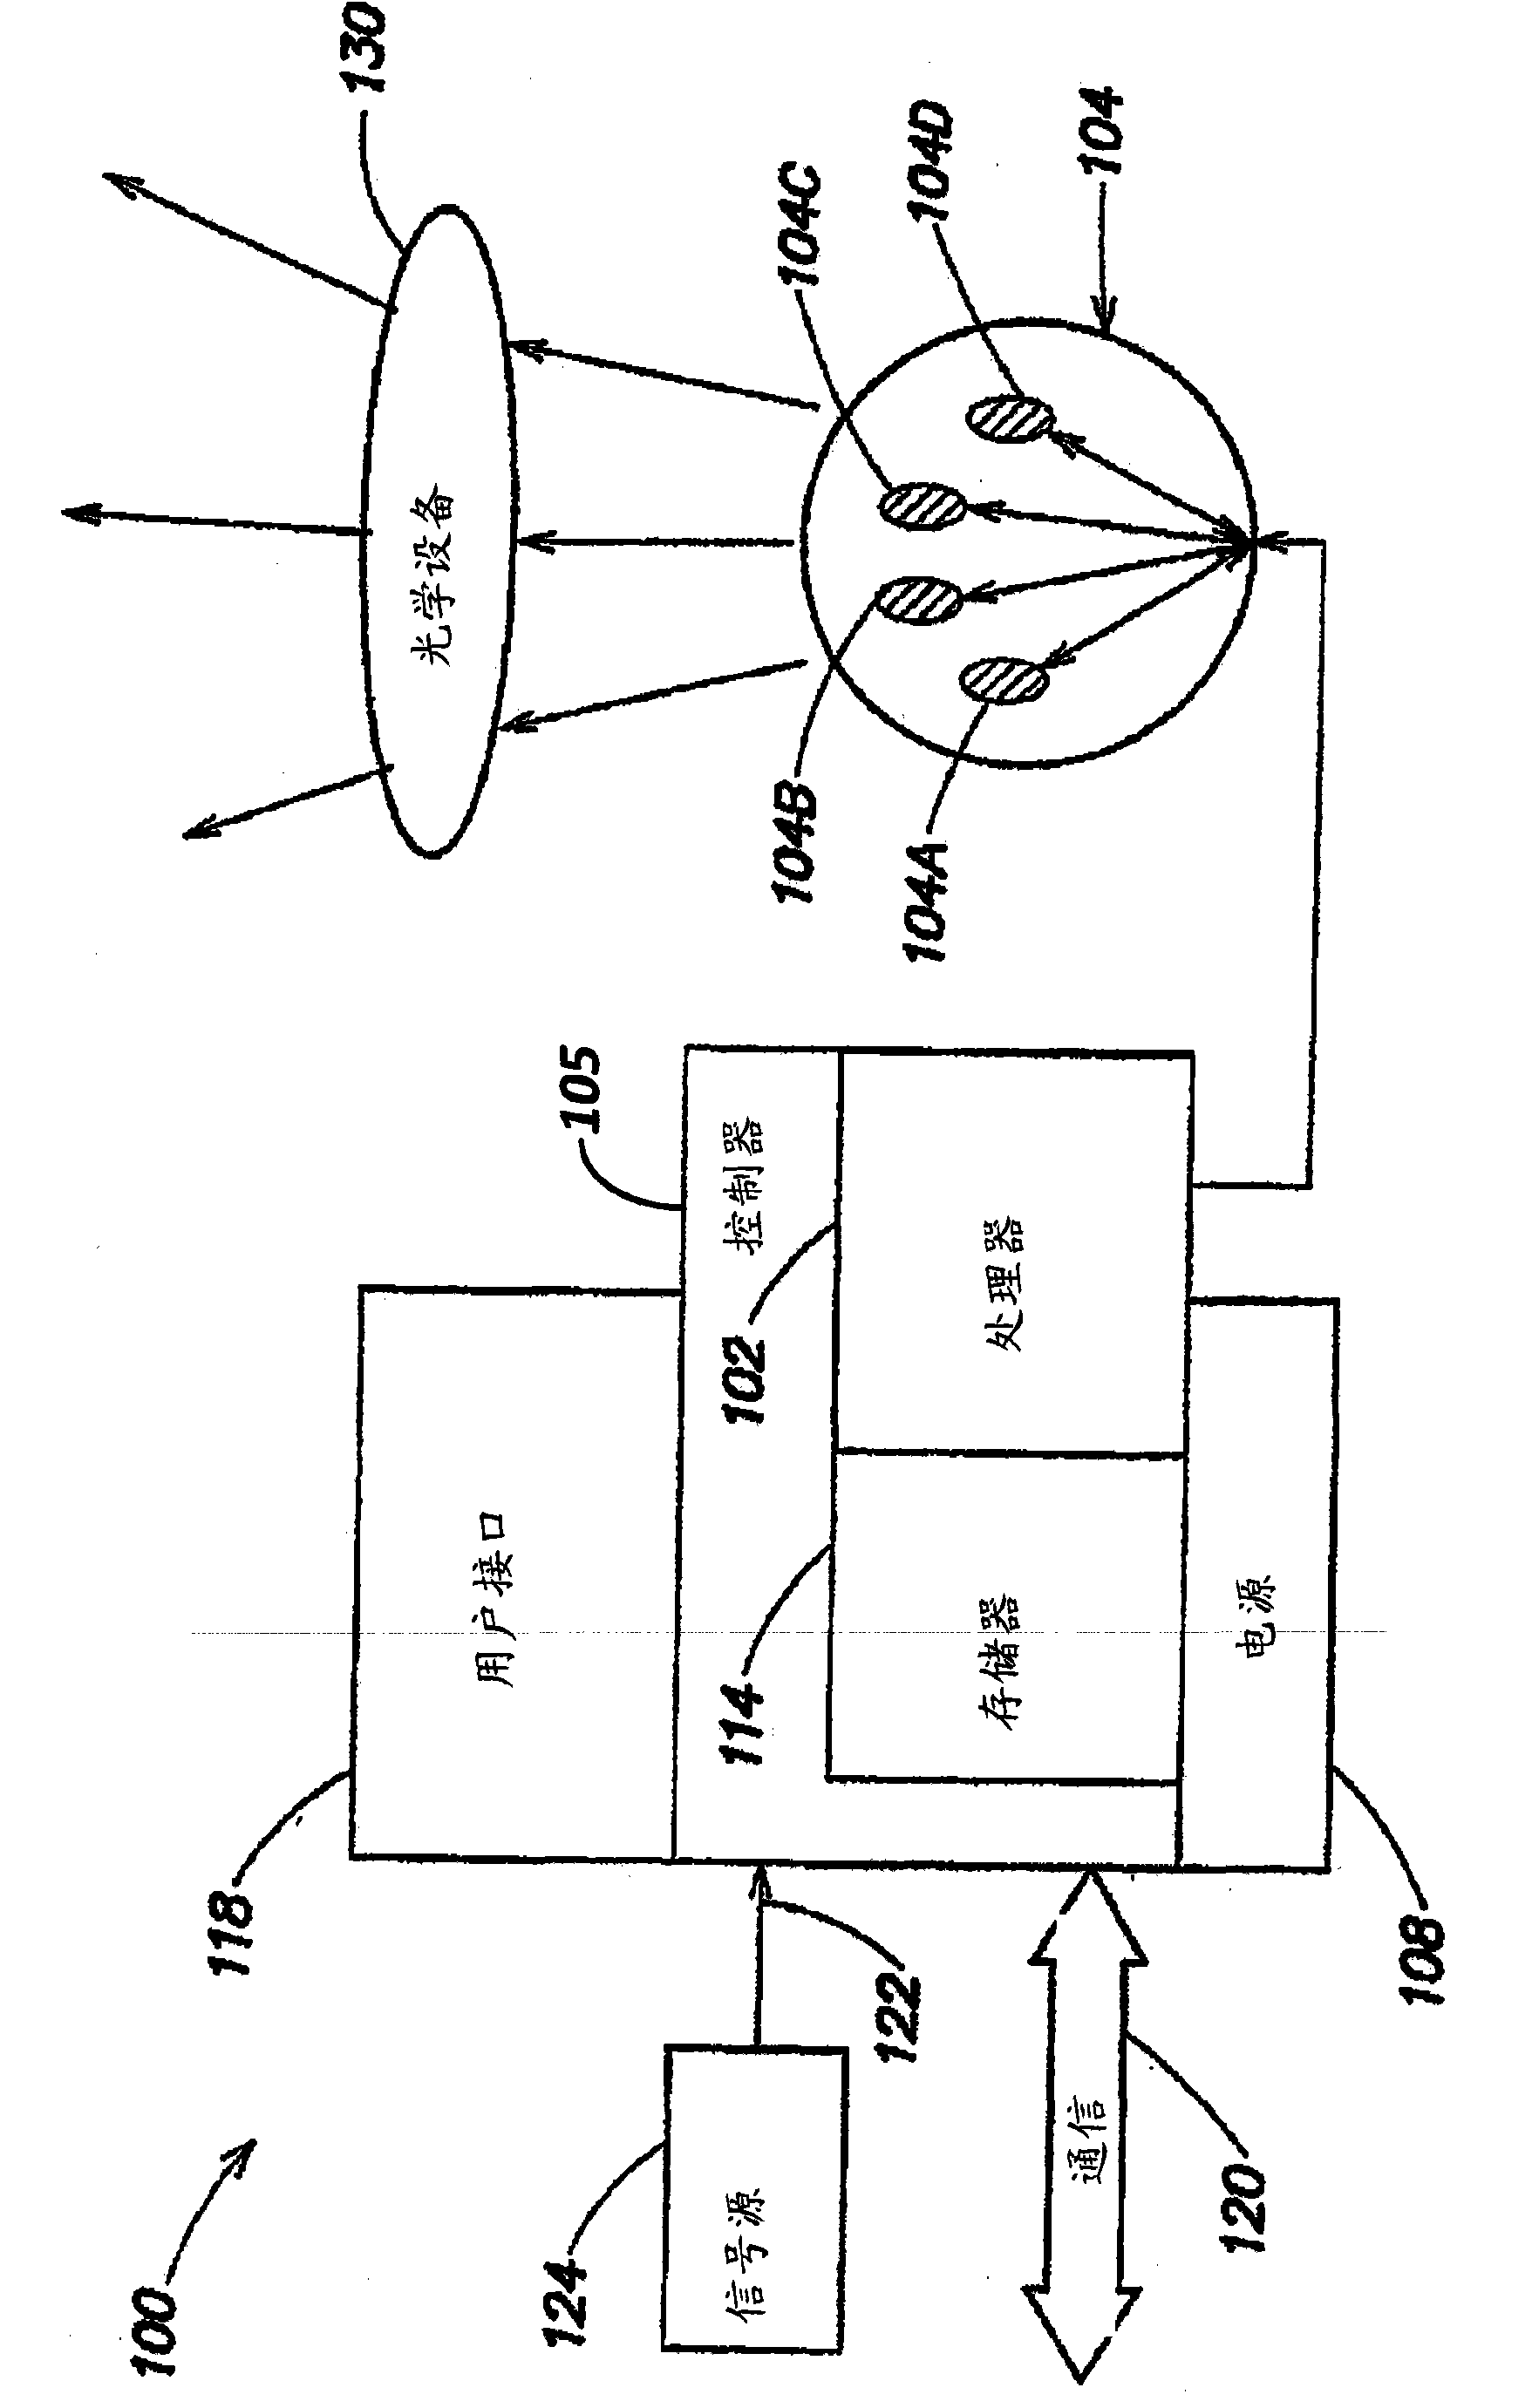 Methods and apparatus for providing led-based spotlight illumination in stage lighting applications